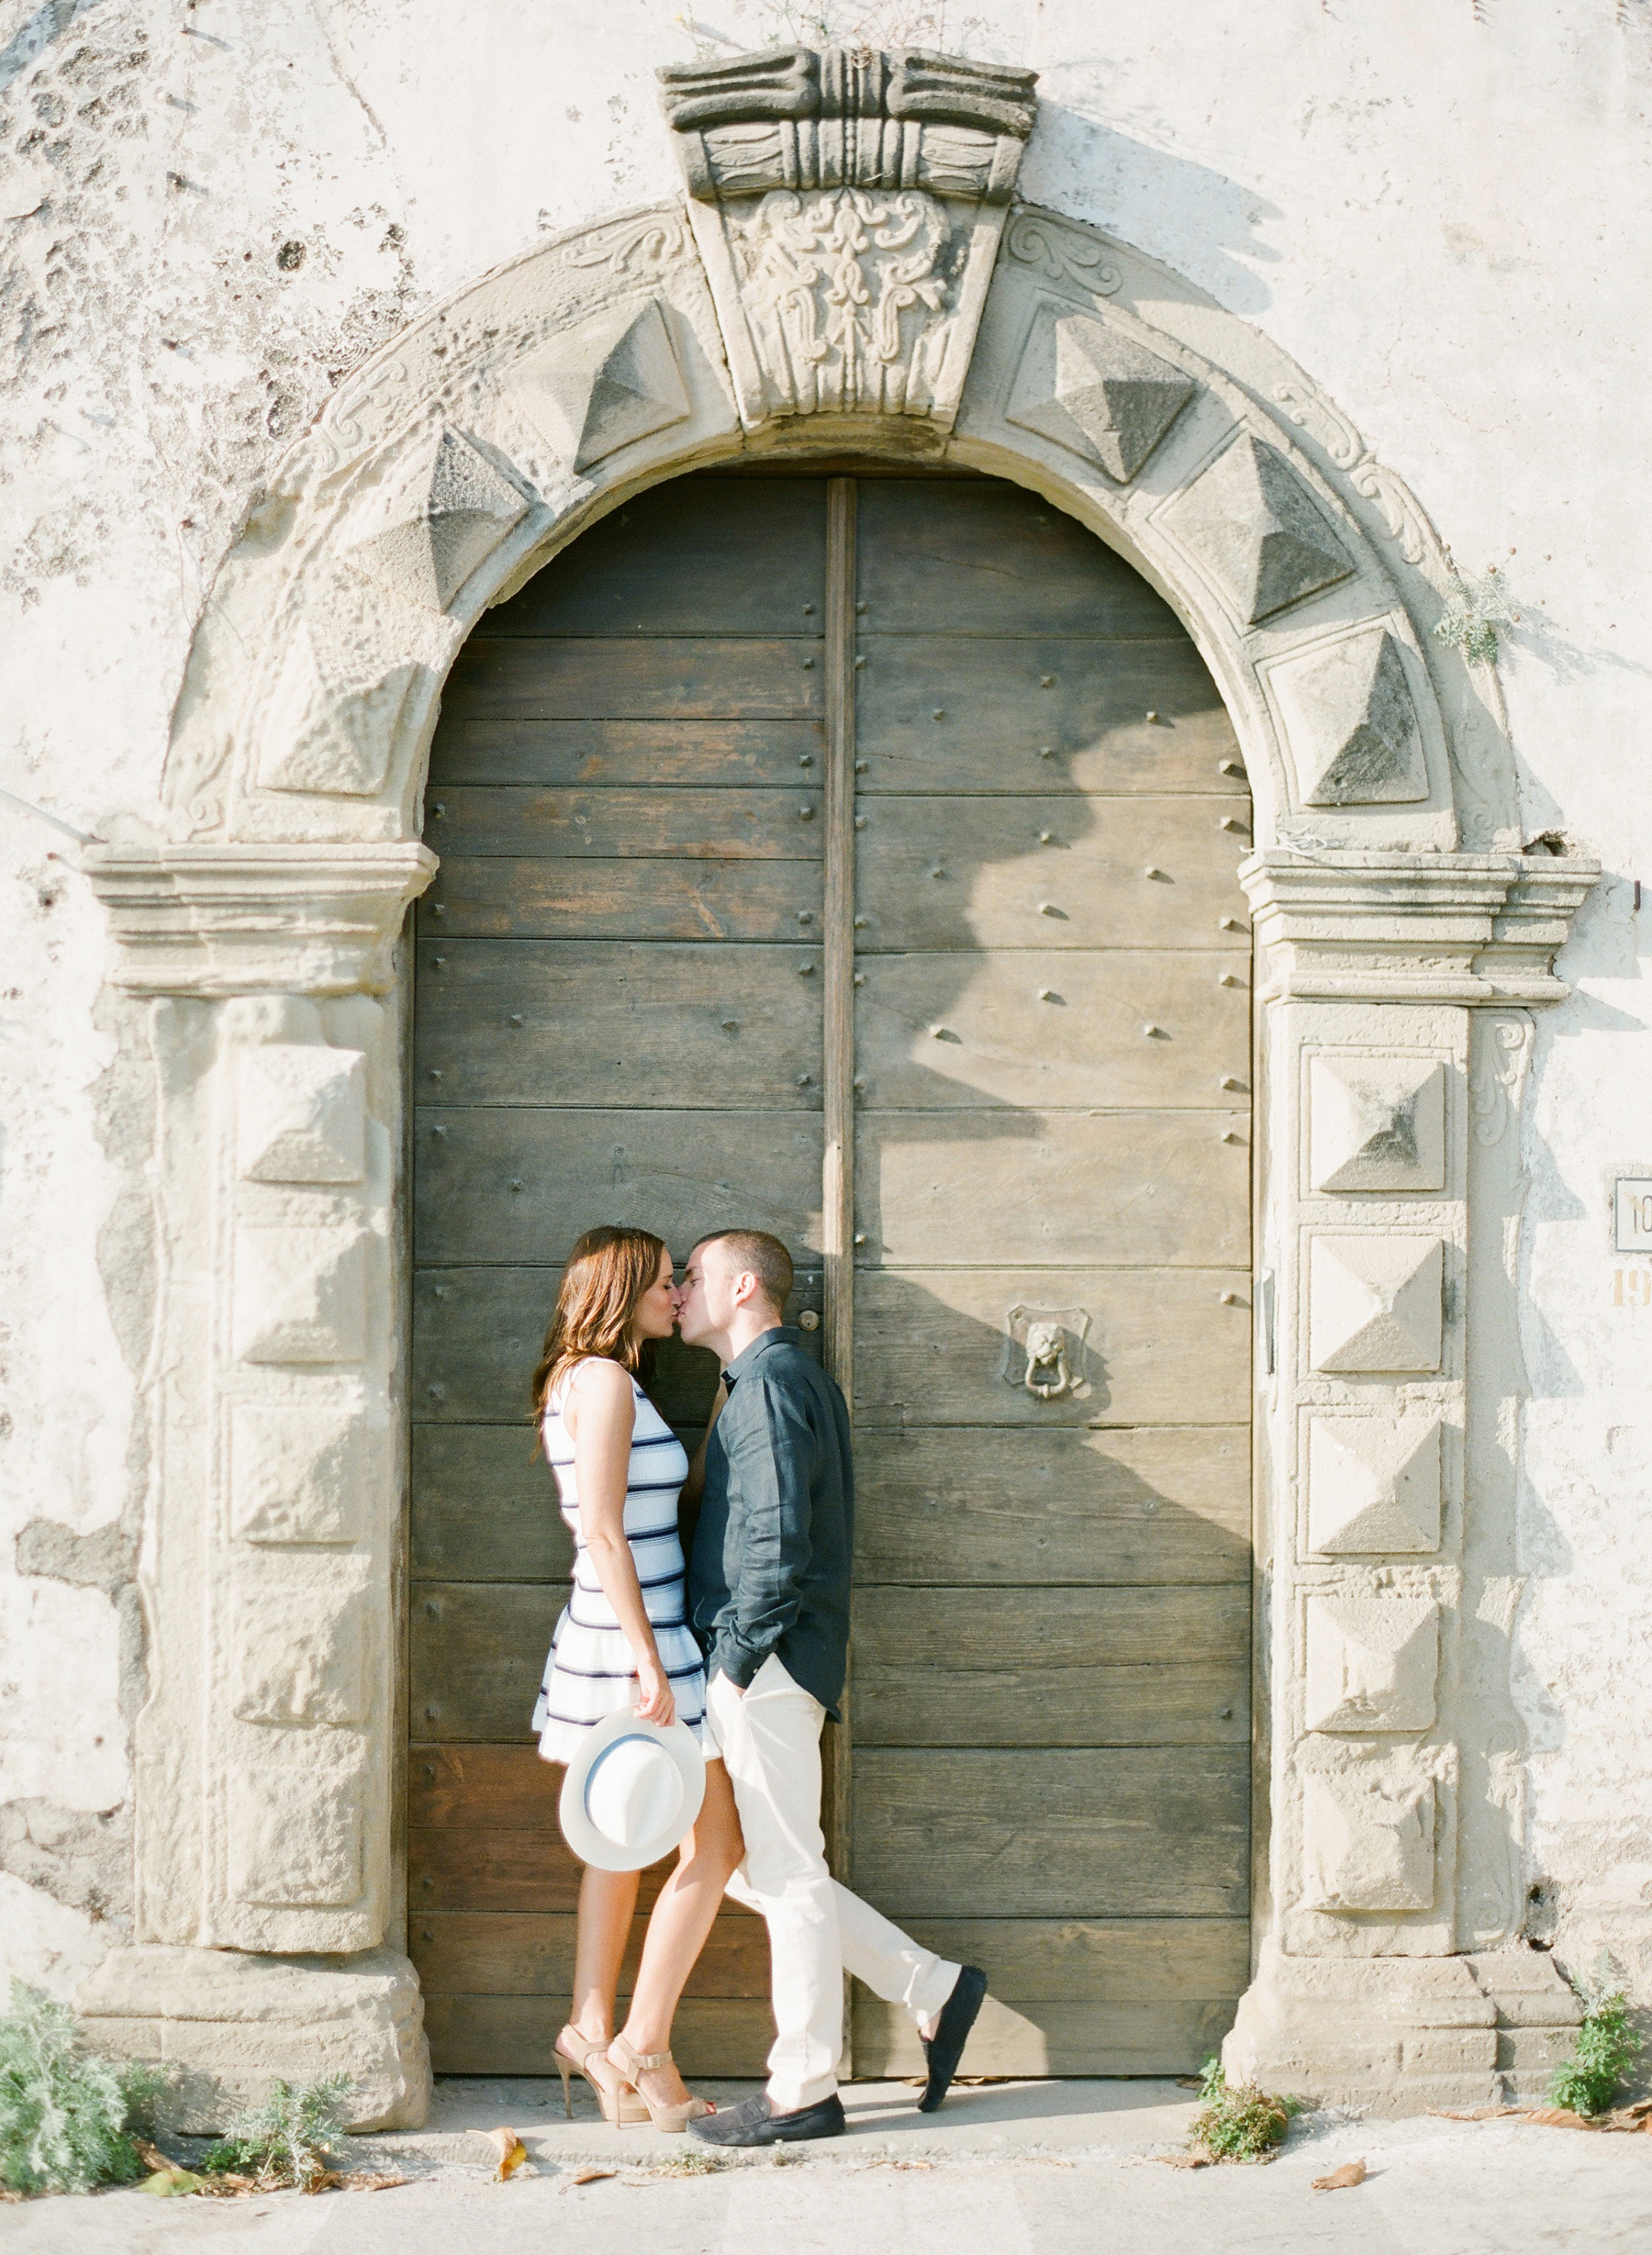 Andy and Adam kissing in front of a historical building in Italy